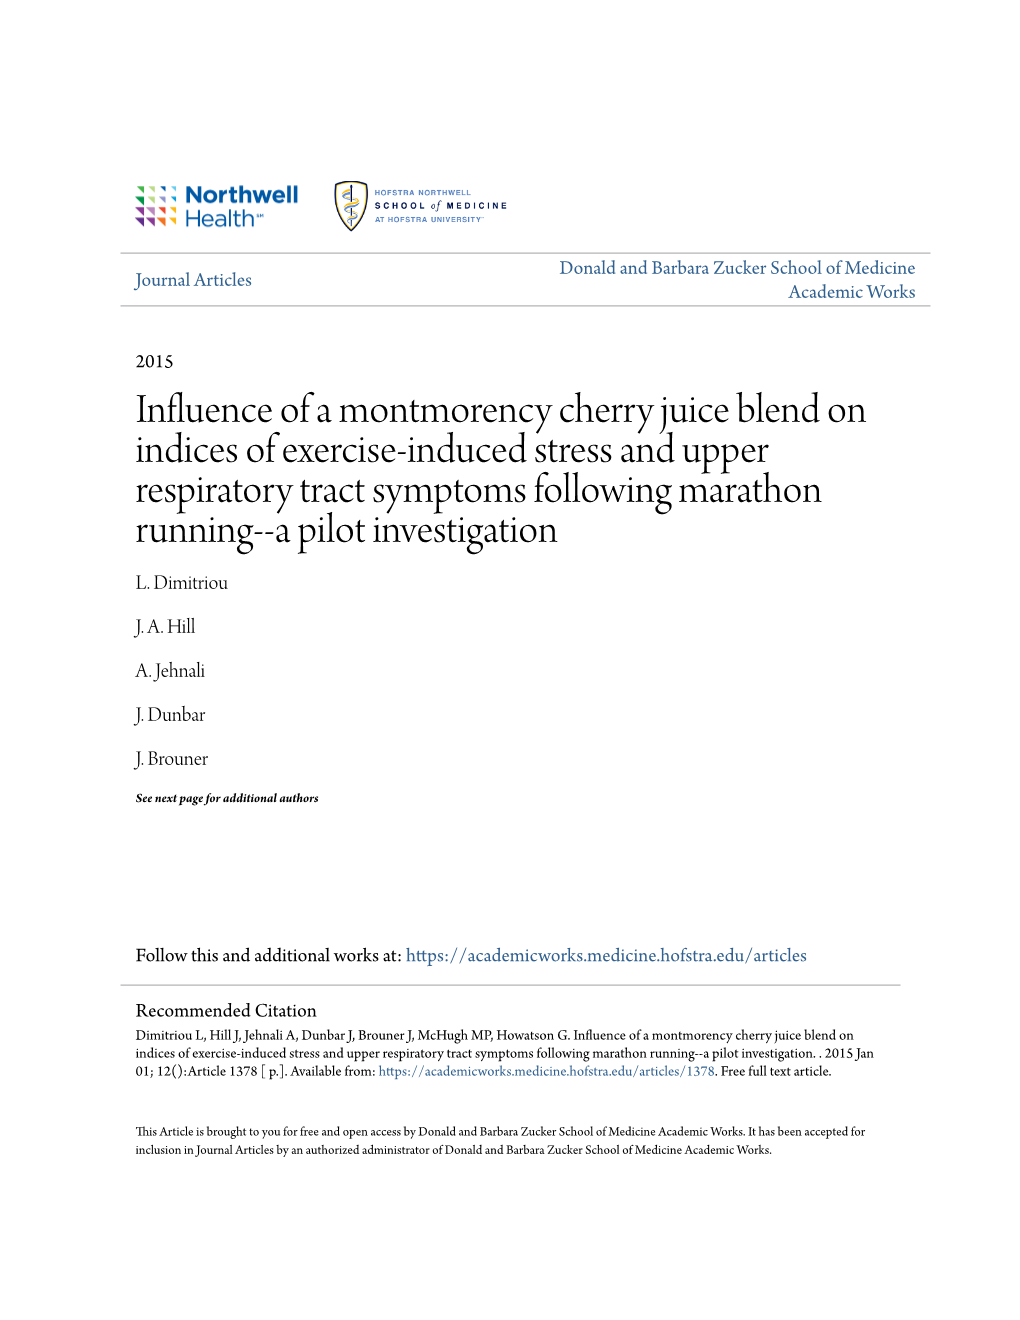 Influence of a Montmorency Cherry Juice Blend on Indices of Exercise